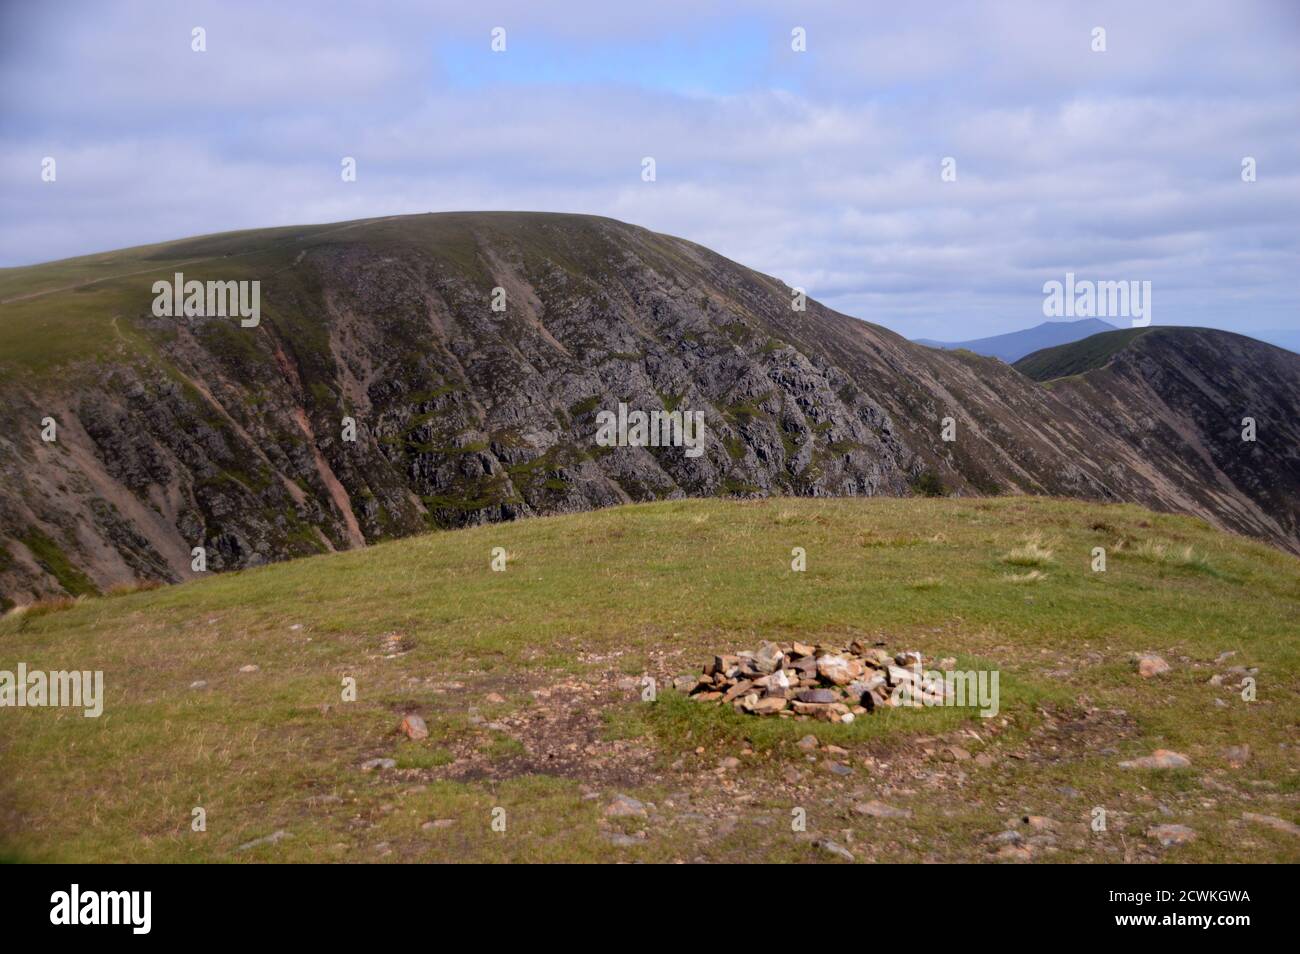 The Wainwrights 'Eel Crag' (Crag Hill) & 'Sail' from the Pile of Stones on the Summit Cairn of  'Wandope' in the Lake District National Park. UK. Stock Photo